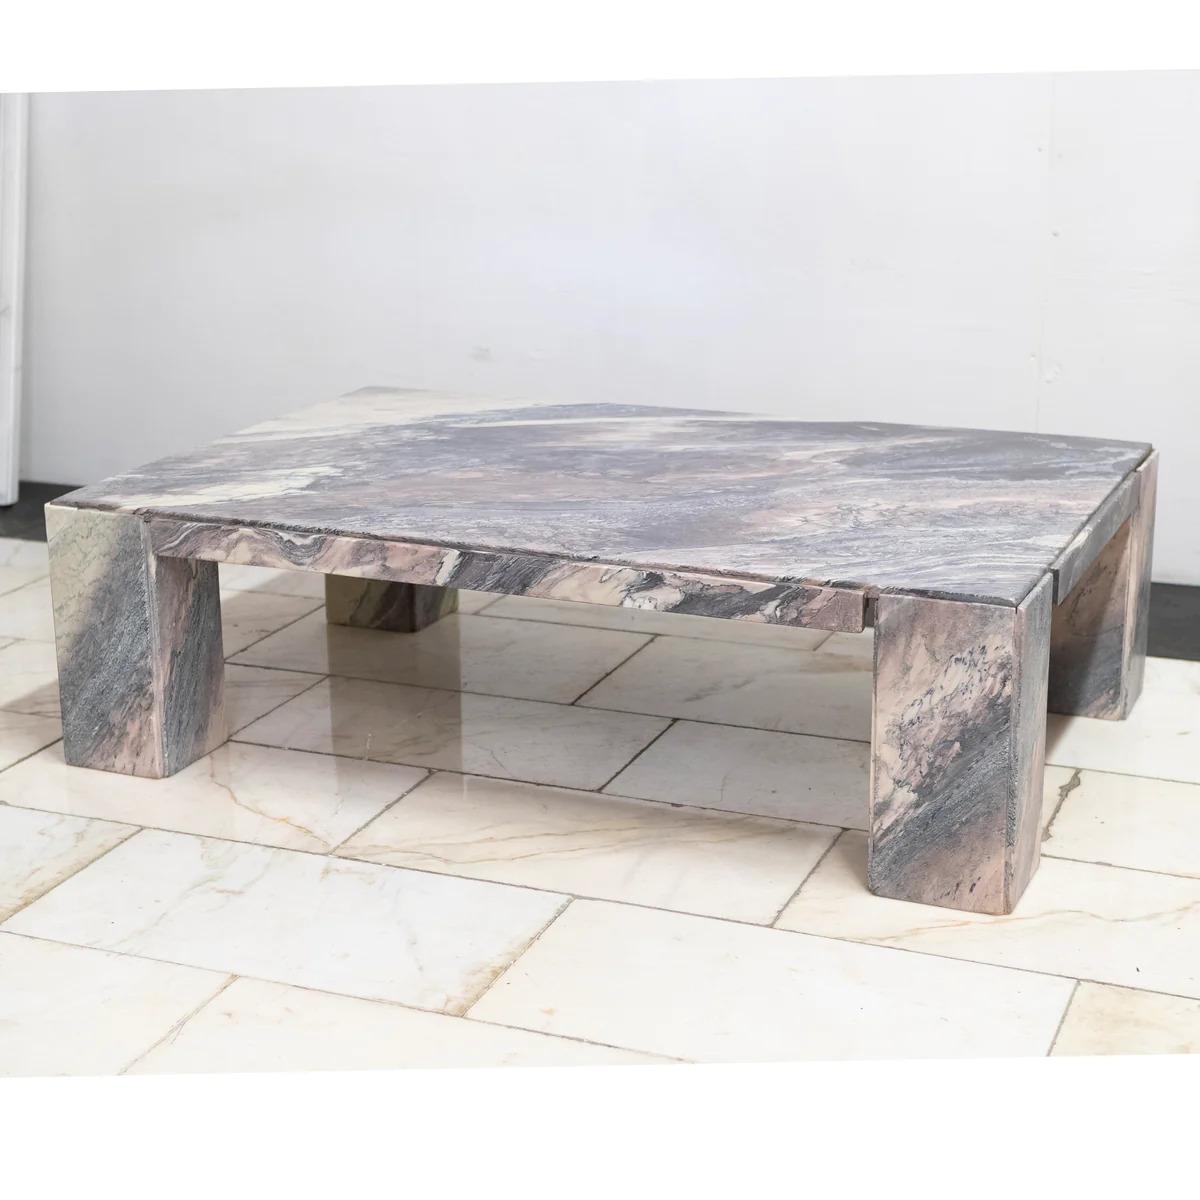 Beautifully simple this reclaimed marble table delivers a wonderful range of mauve, purple and pink hues from the enigmatic Italian marble. 

The minimalist design allows the marble to be the focal point of this functional coffee table. The original